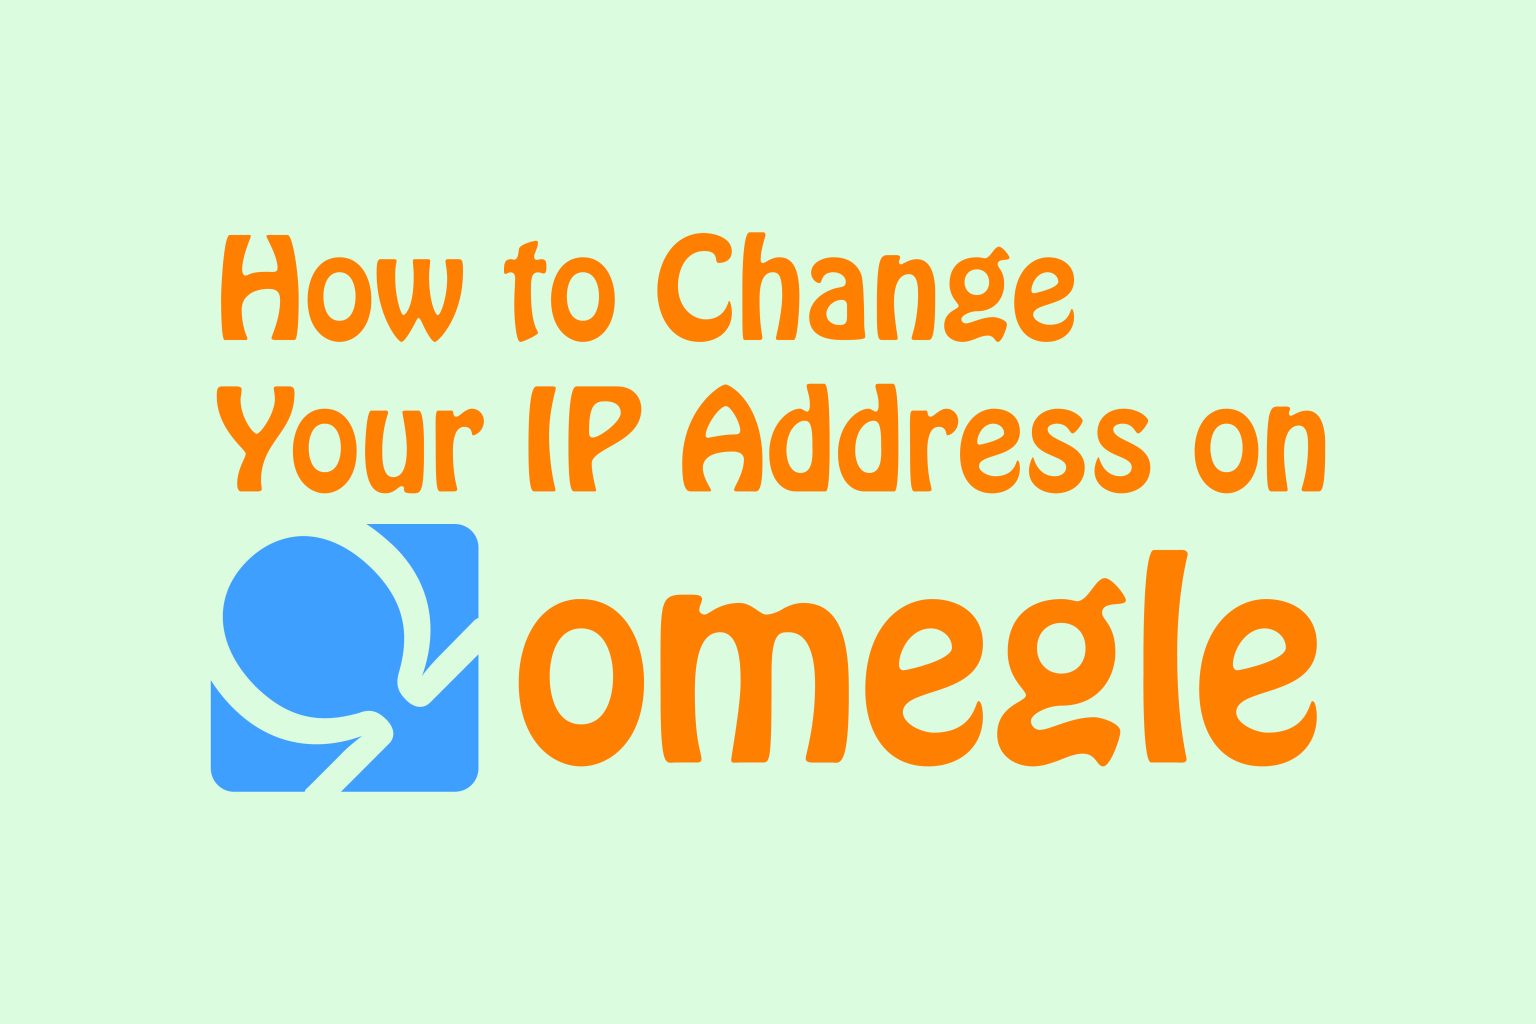 syncro omegle ip location download